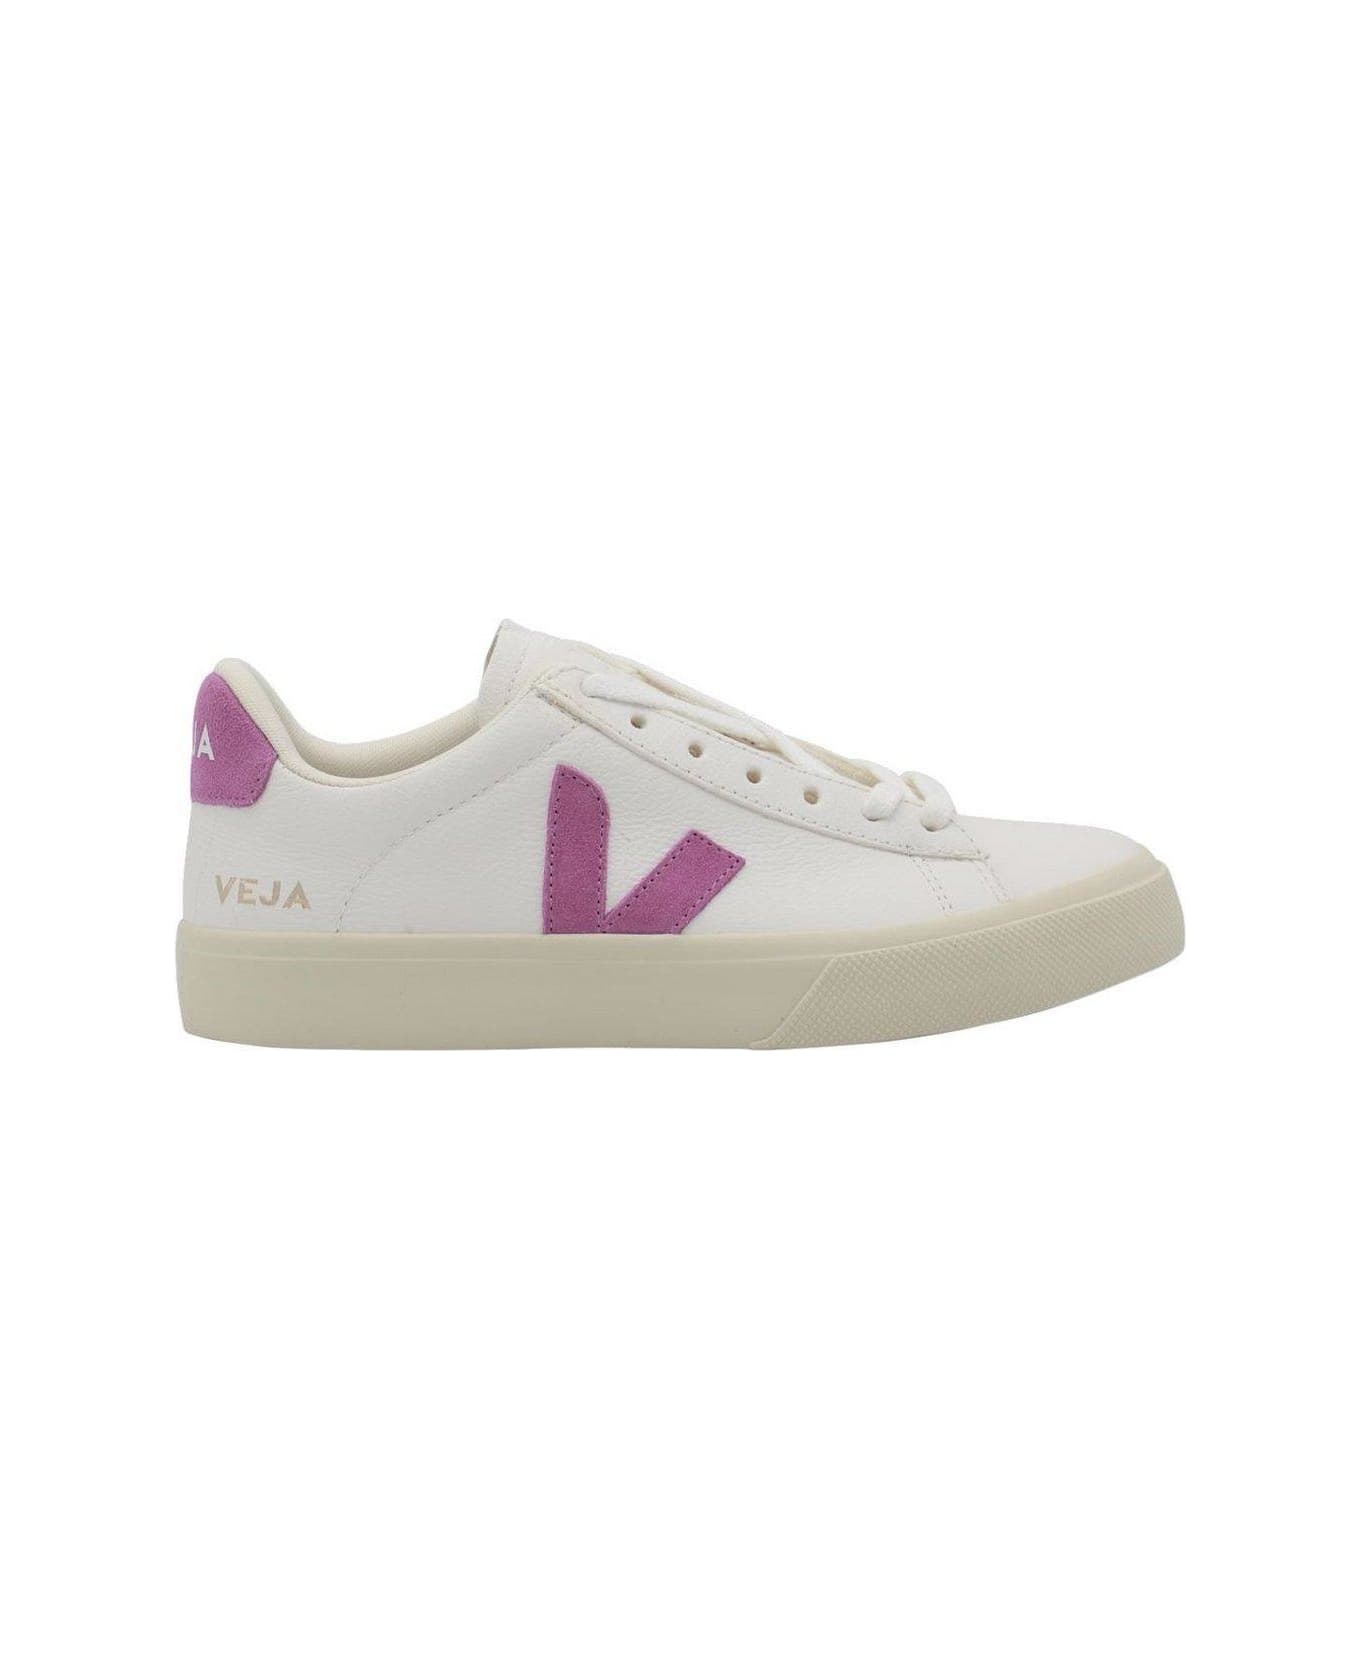 Veja Campo Logo Patch Sneakers - White/Mulberry スニーカー